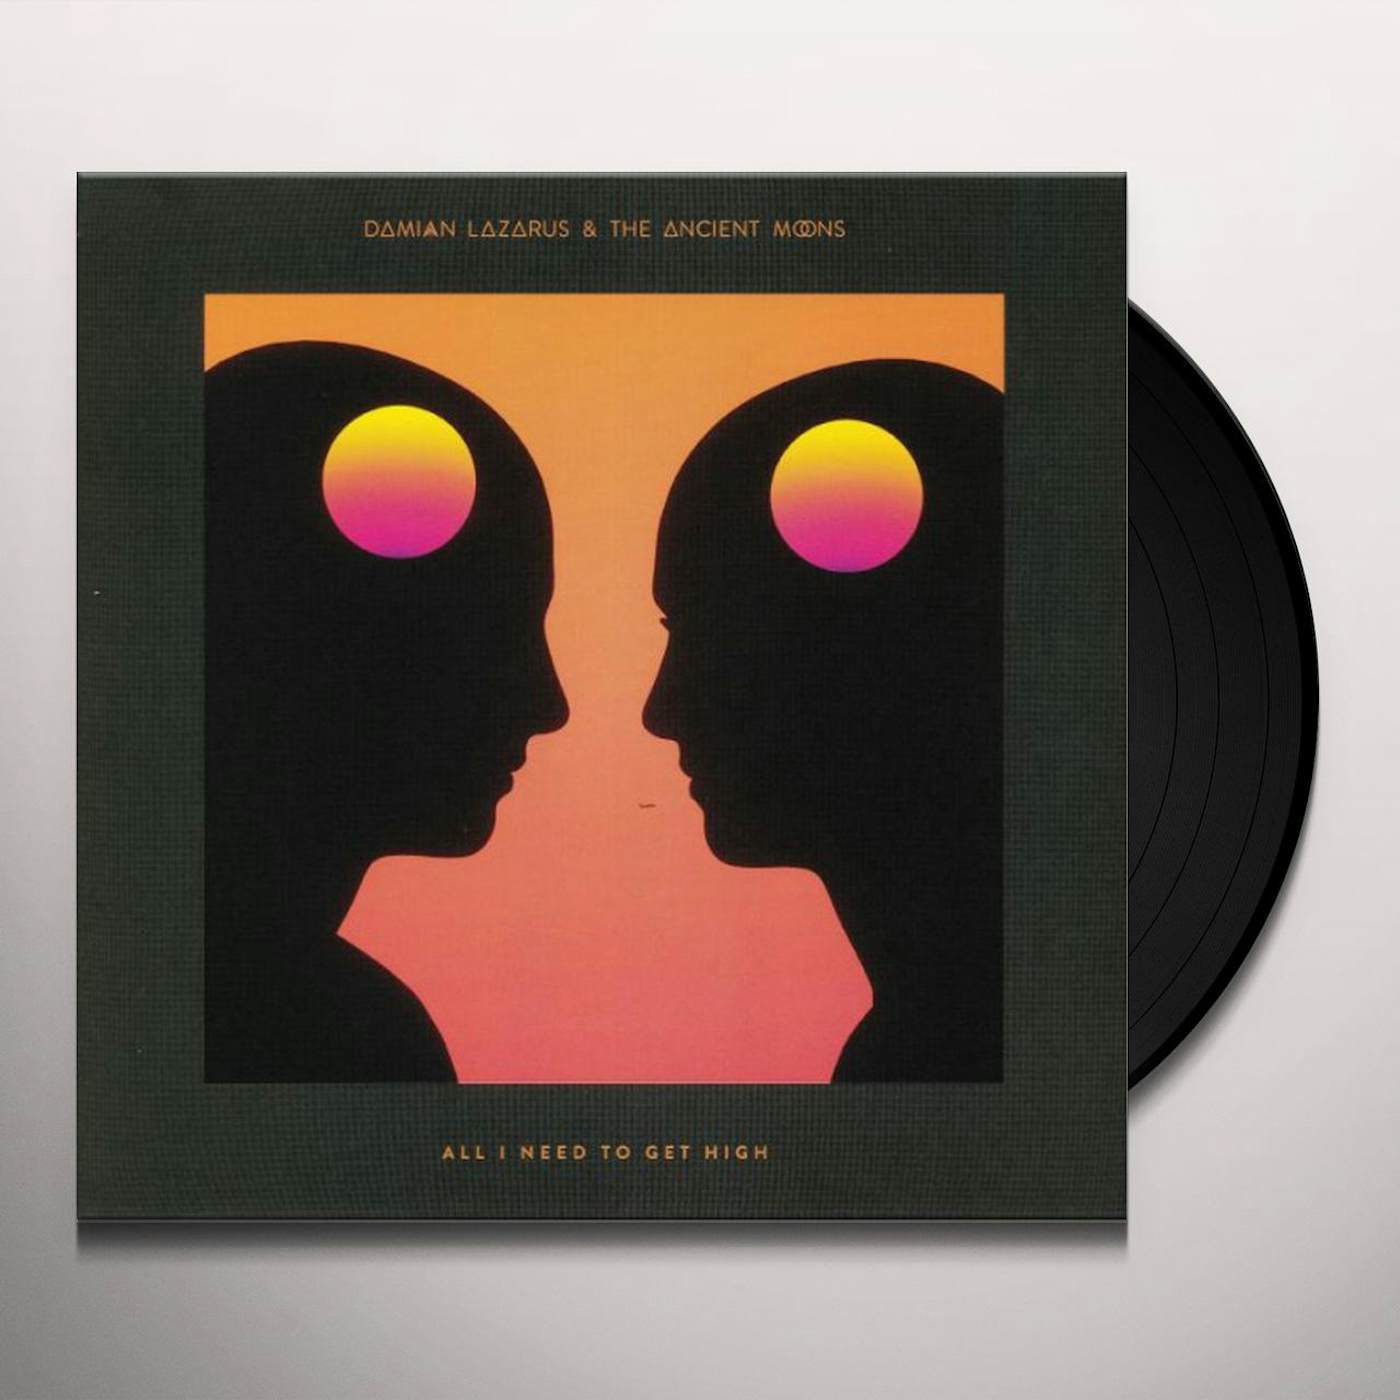 Damian Lazarus & The Ancient Moons All I Need To Get High Vinyl Record